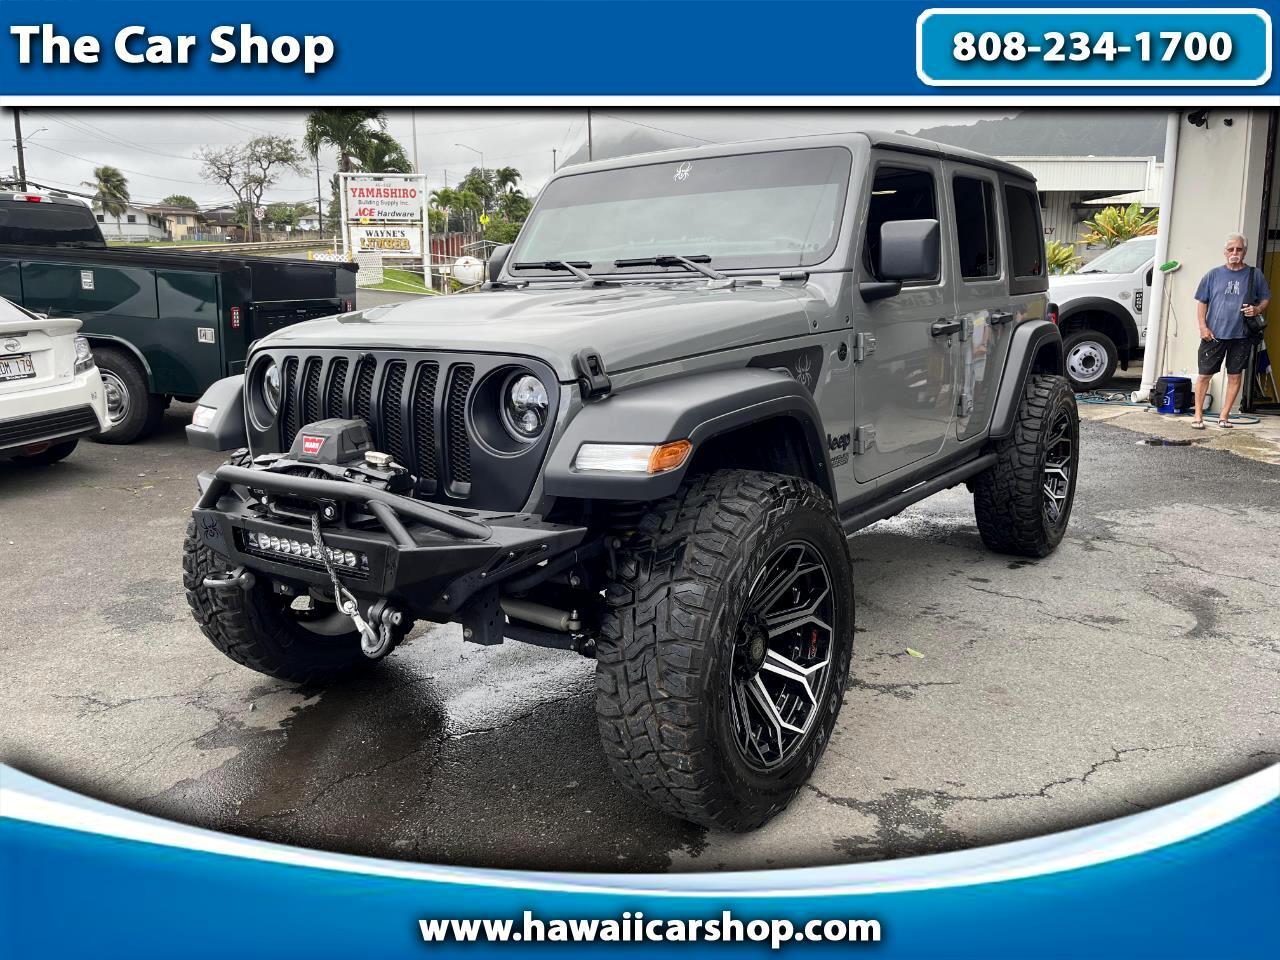 Used 2021 Jeep Wrangler BLACK WIDOW EDITION for Sale in Honolulu HI 96816  The Car Shop